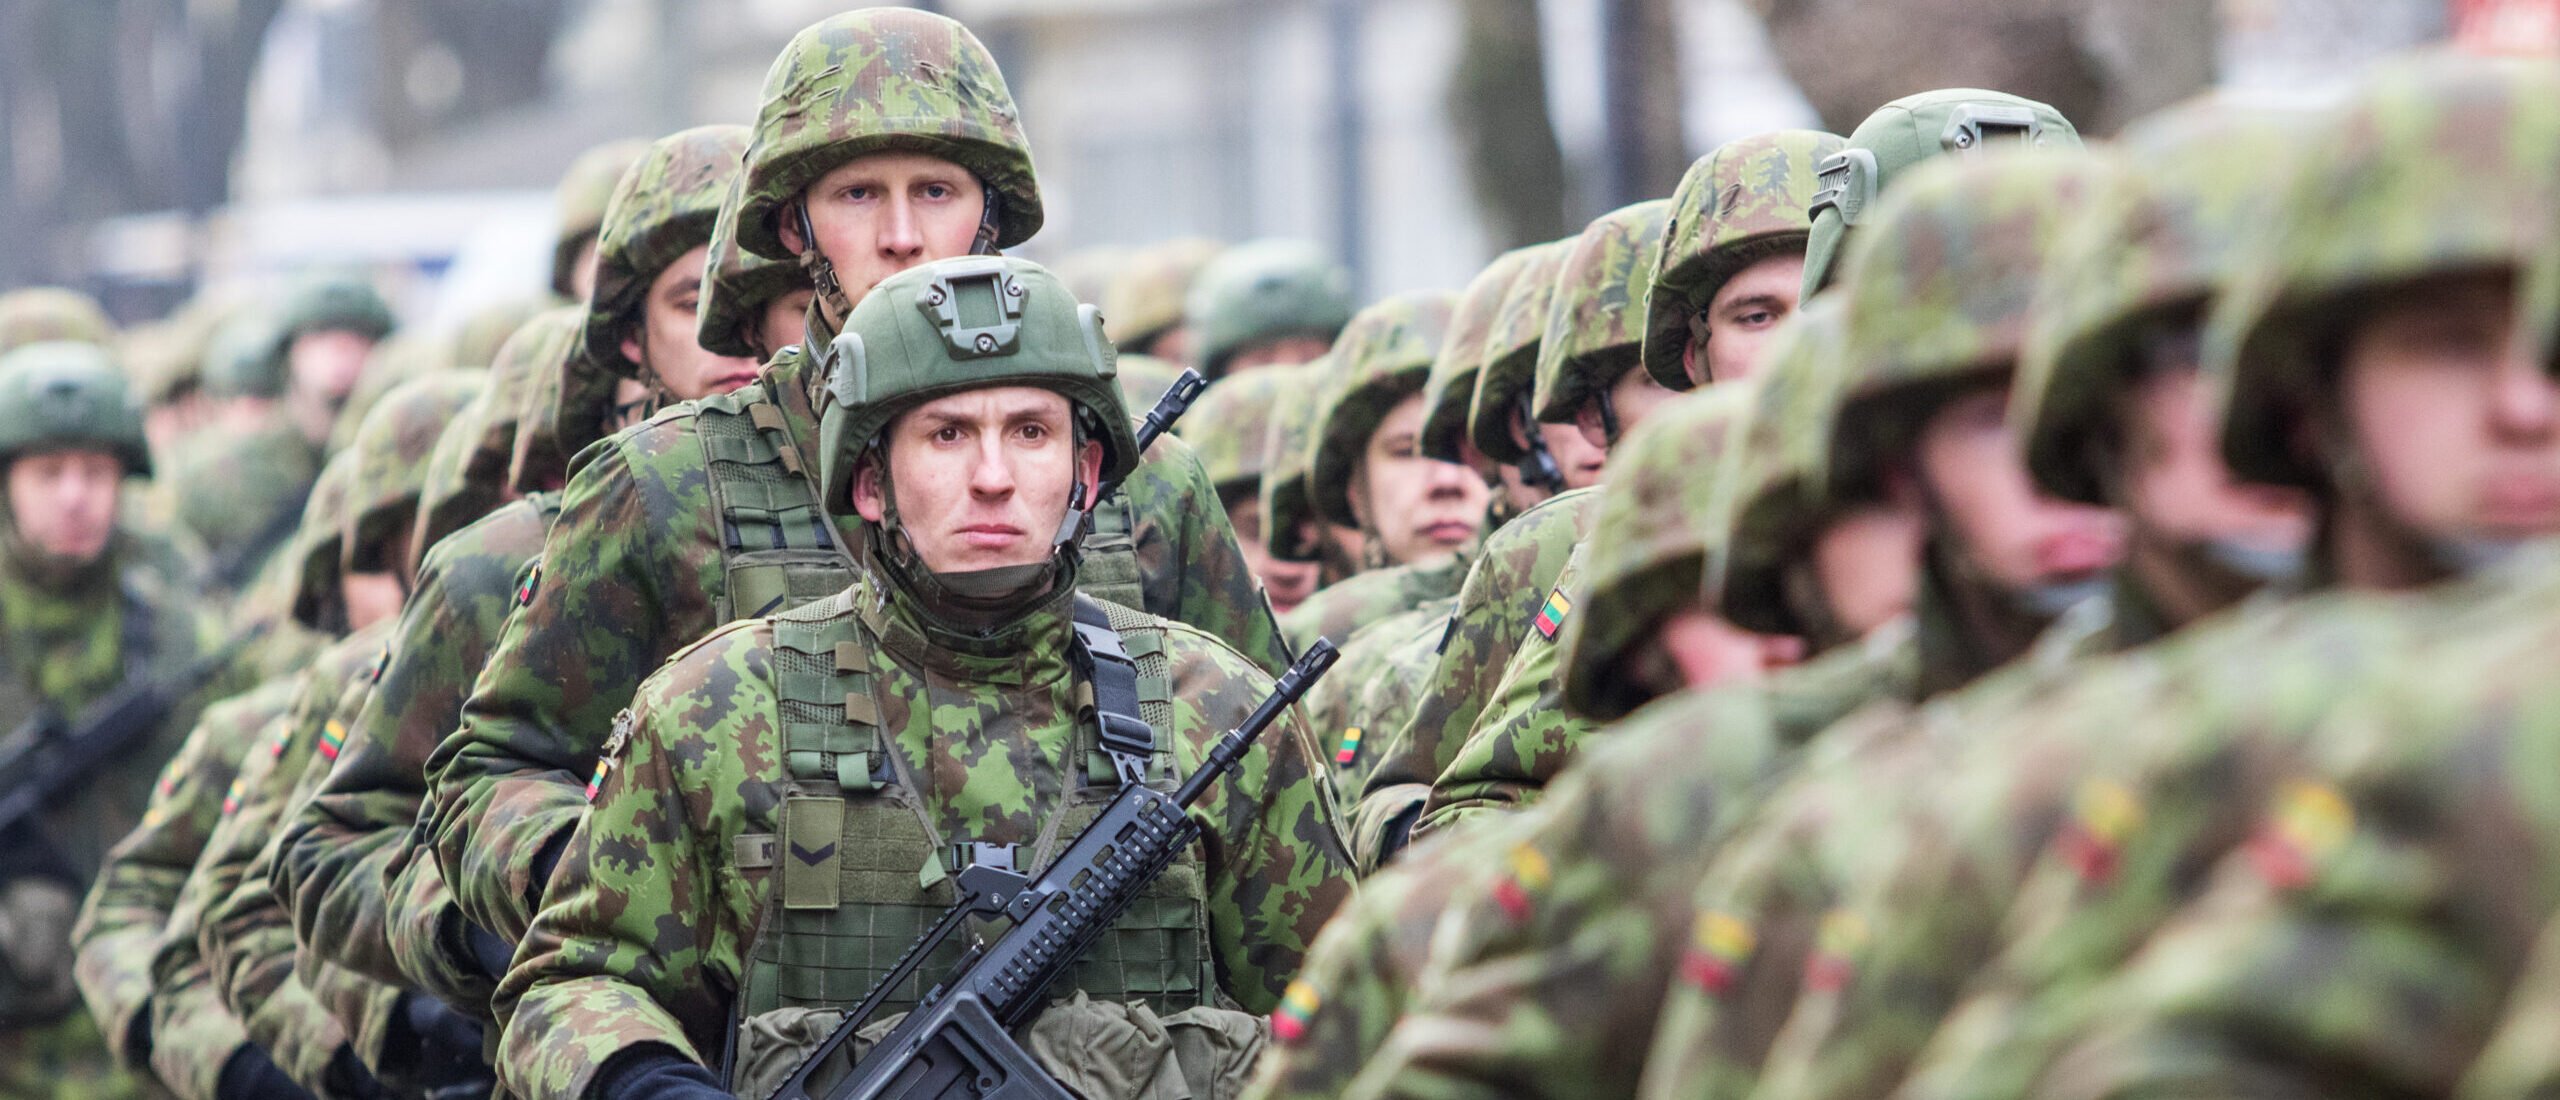 Foreign Affairs: Europe must seriously consider deploying troops in Ukraine